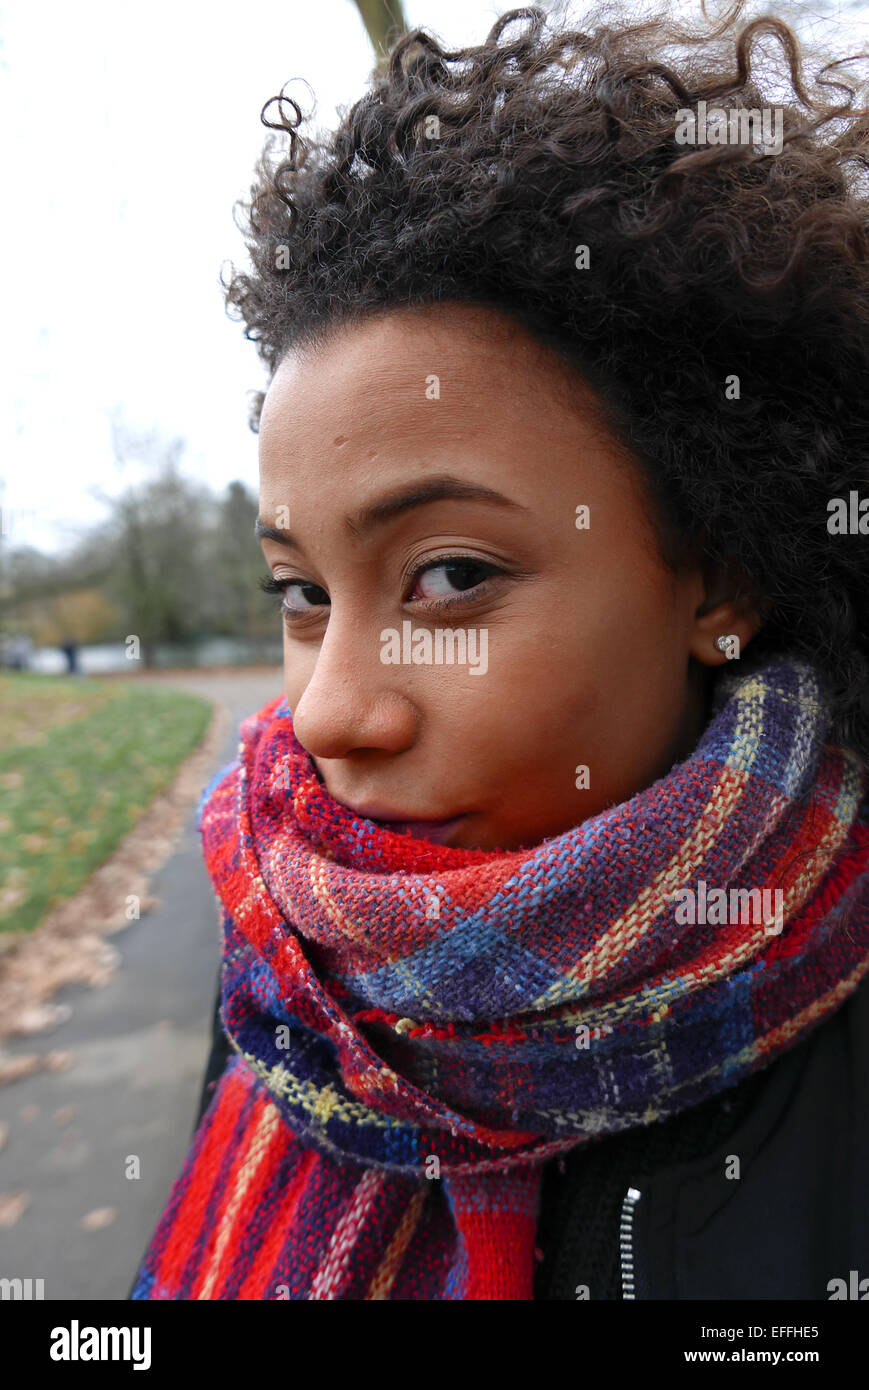 united kingdom london regents park portrait of a young and fashionable mixed race girl Stock Photo